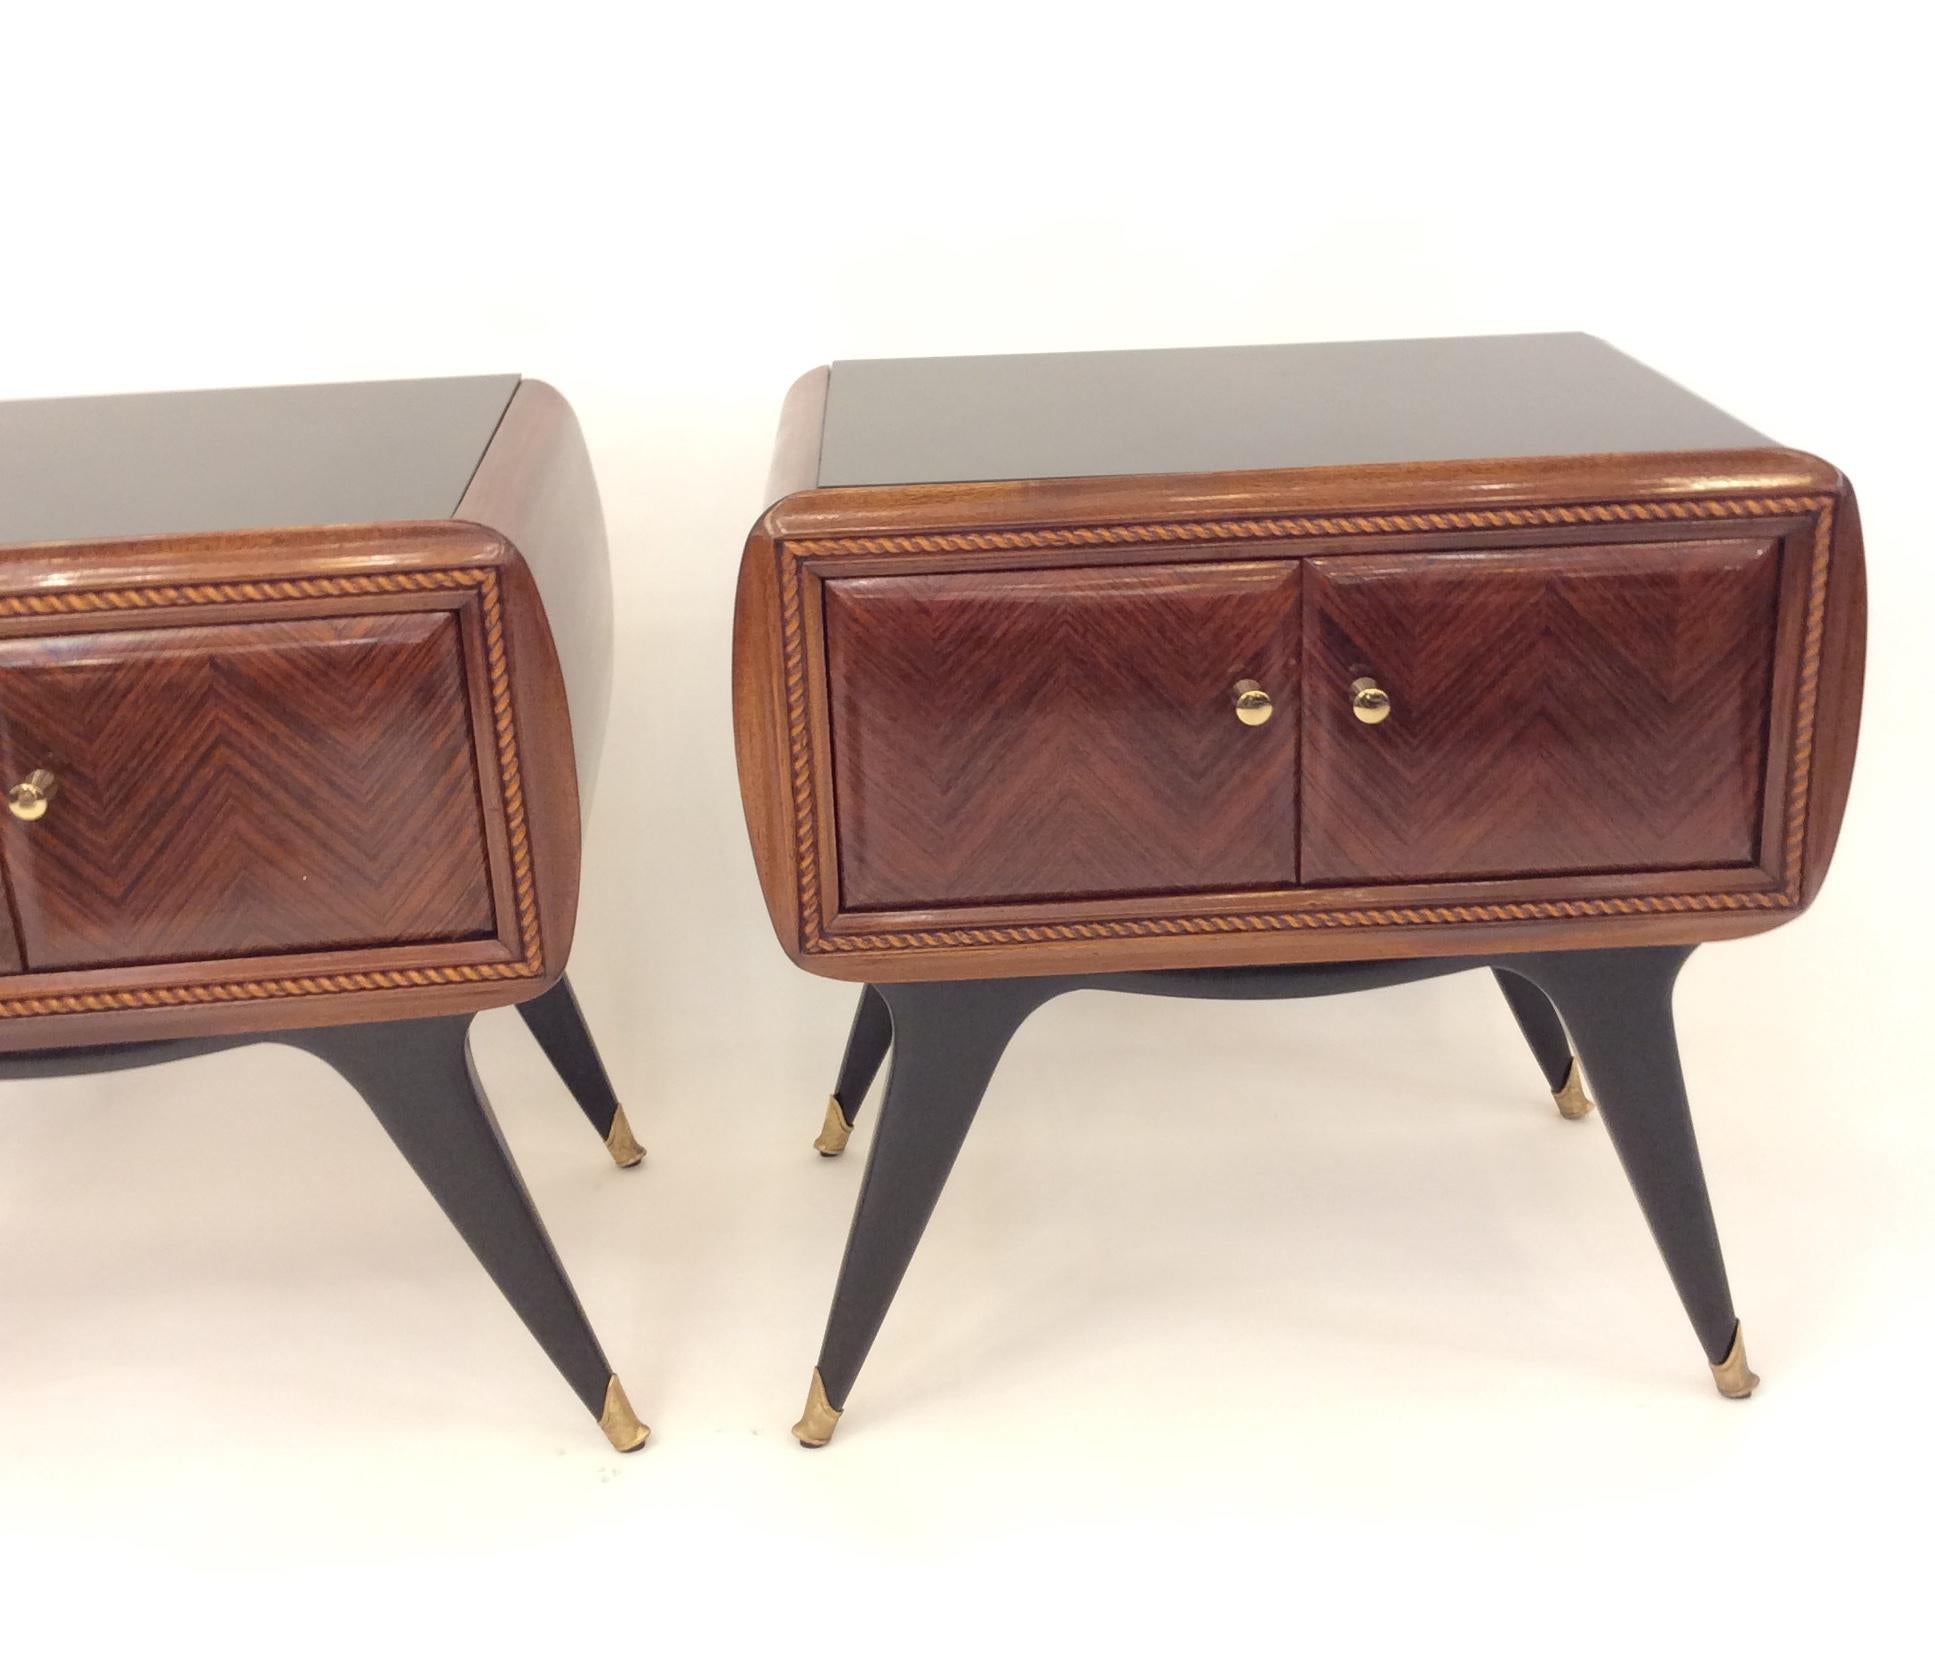 Pair of Italian Nightstands in the Style of Gio Ponti, circa 1950 For Sale 2